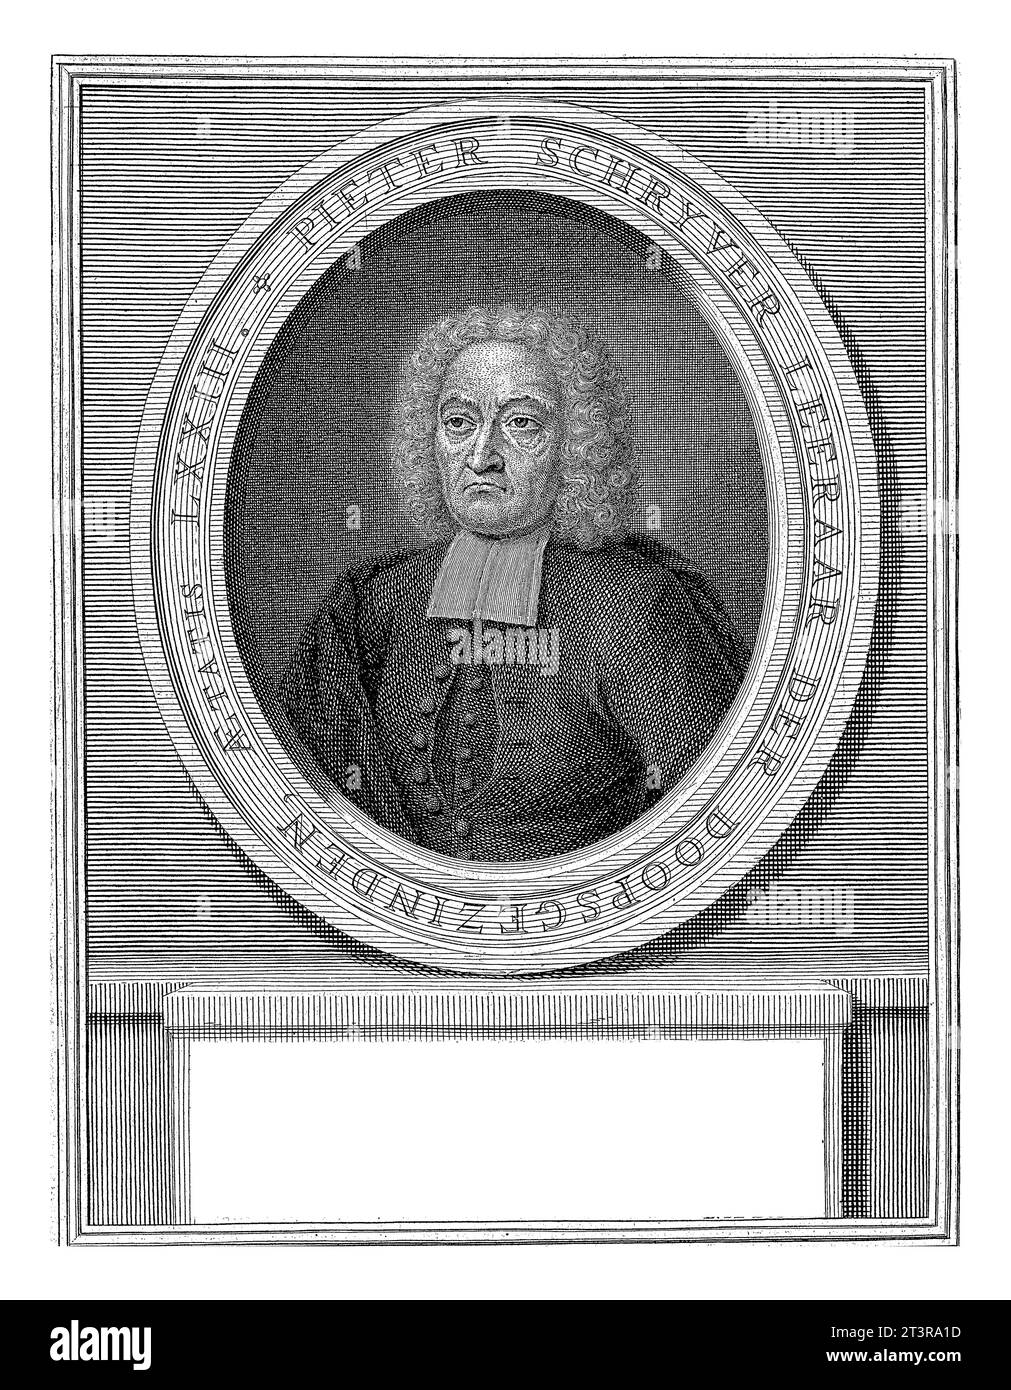 Portrait of Pieter Schrijver, Jacob Folkema, after Anna Folkema, 1739 Portrait bust in oval to the left of preacher Pieter Schrijver, bareheaded. Stock Photo